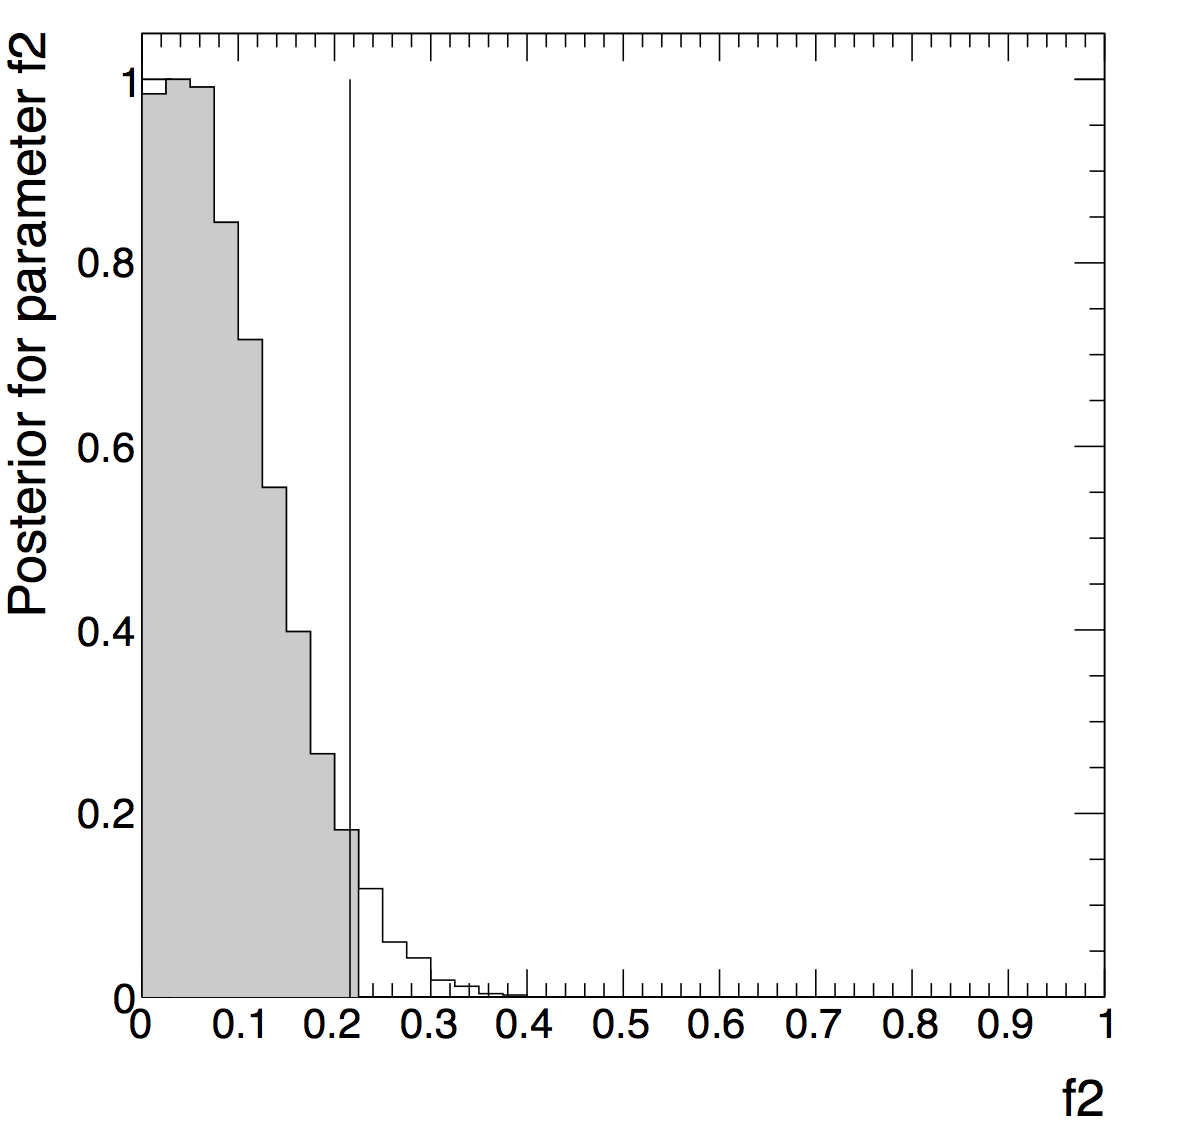 _images/bayesian_mcmc_posterior_0f2.png